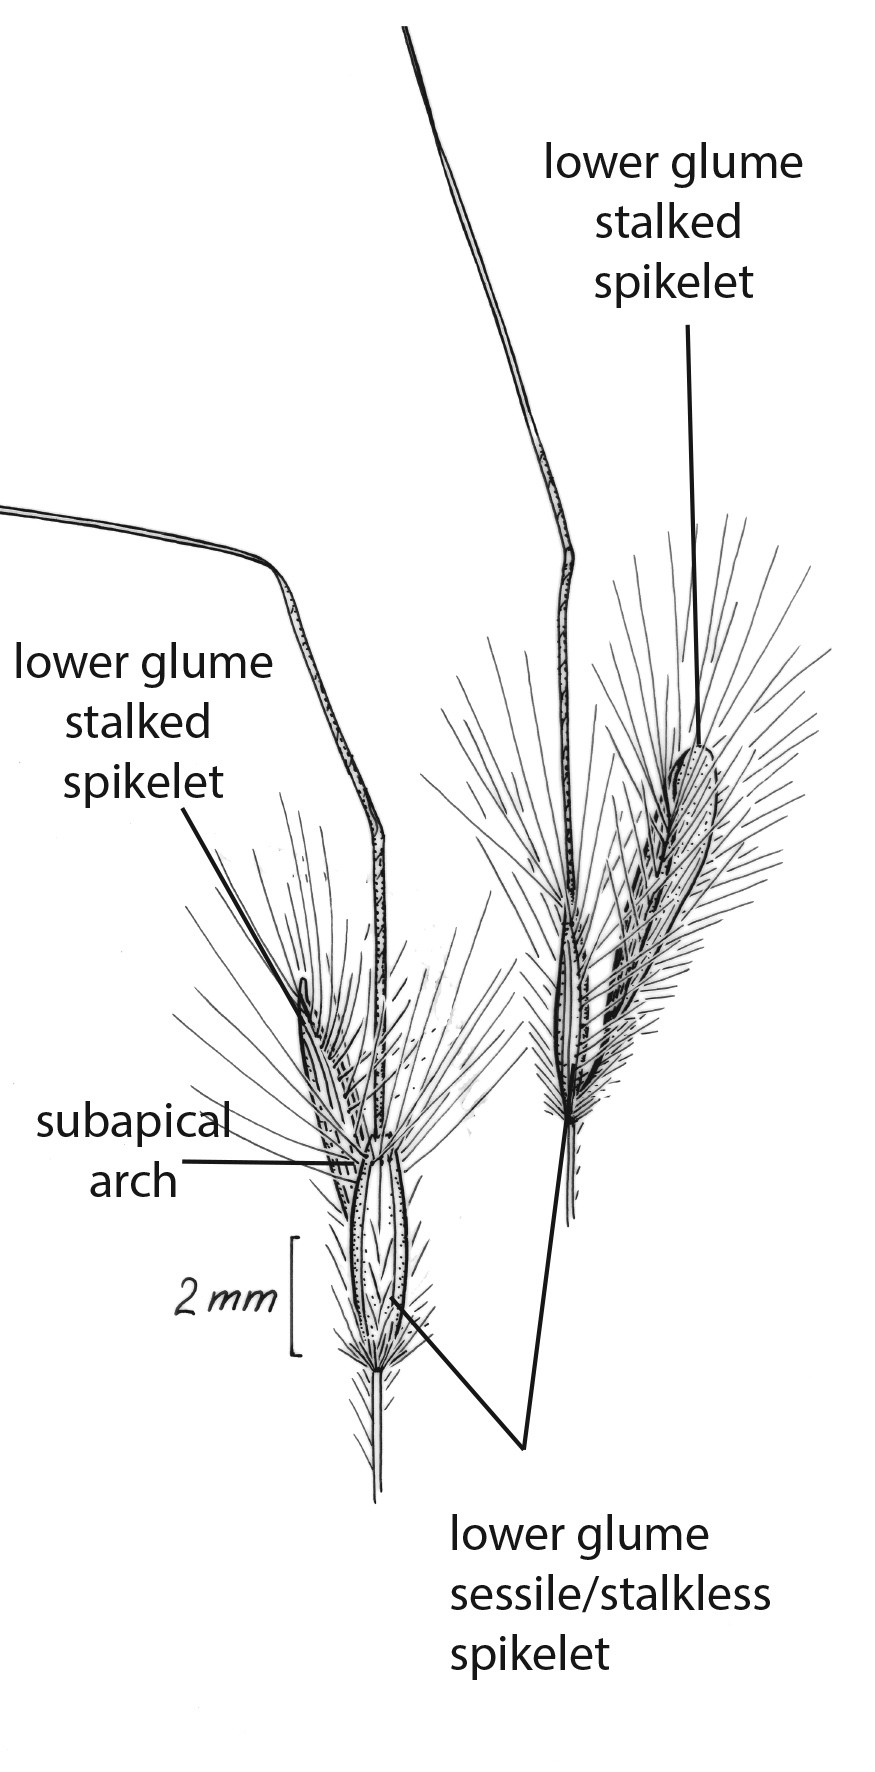 Fig. 4. Line drawing reproduced from Cowie et al (2002) of spikelet pairs of Dichanthium sericeum from front and side view, showing details of stalkless and stalked spikelets. (CC By: Monika Osterkamp Madsen)